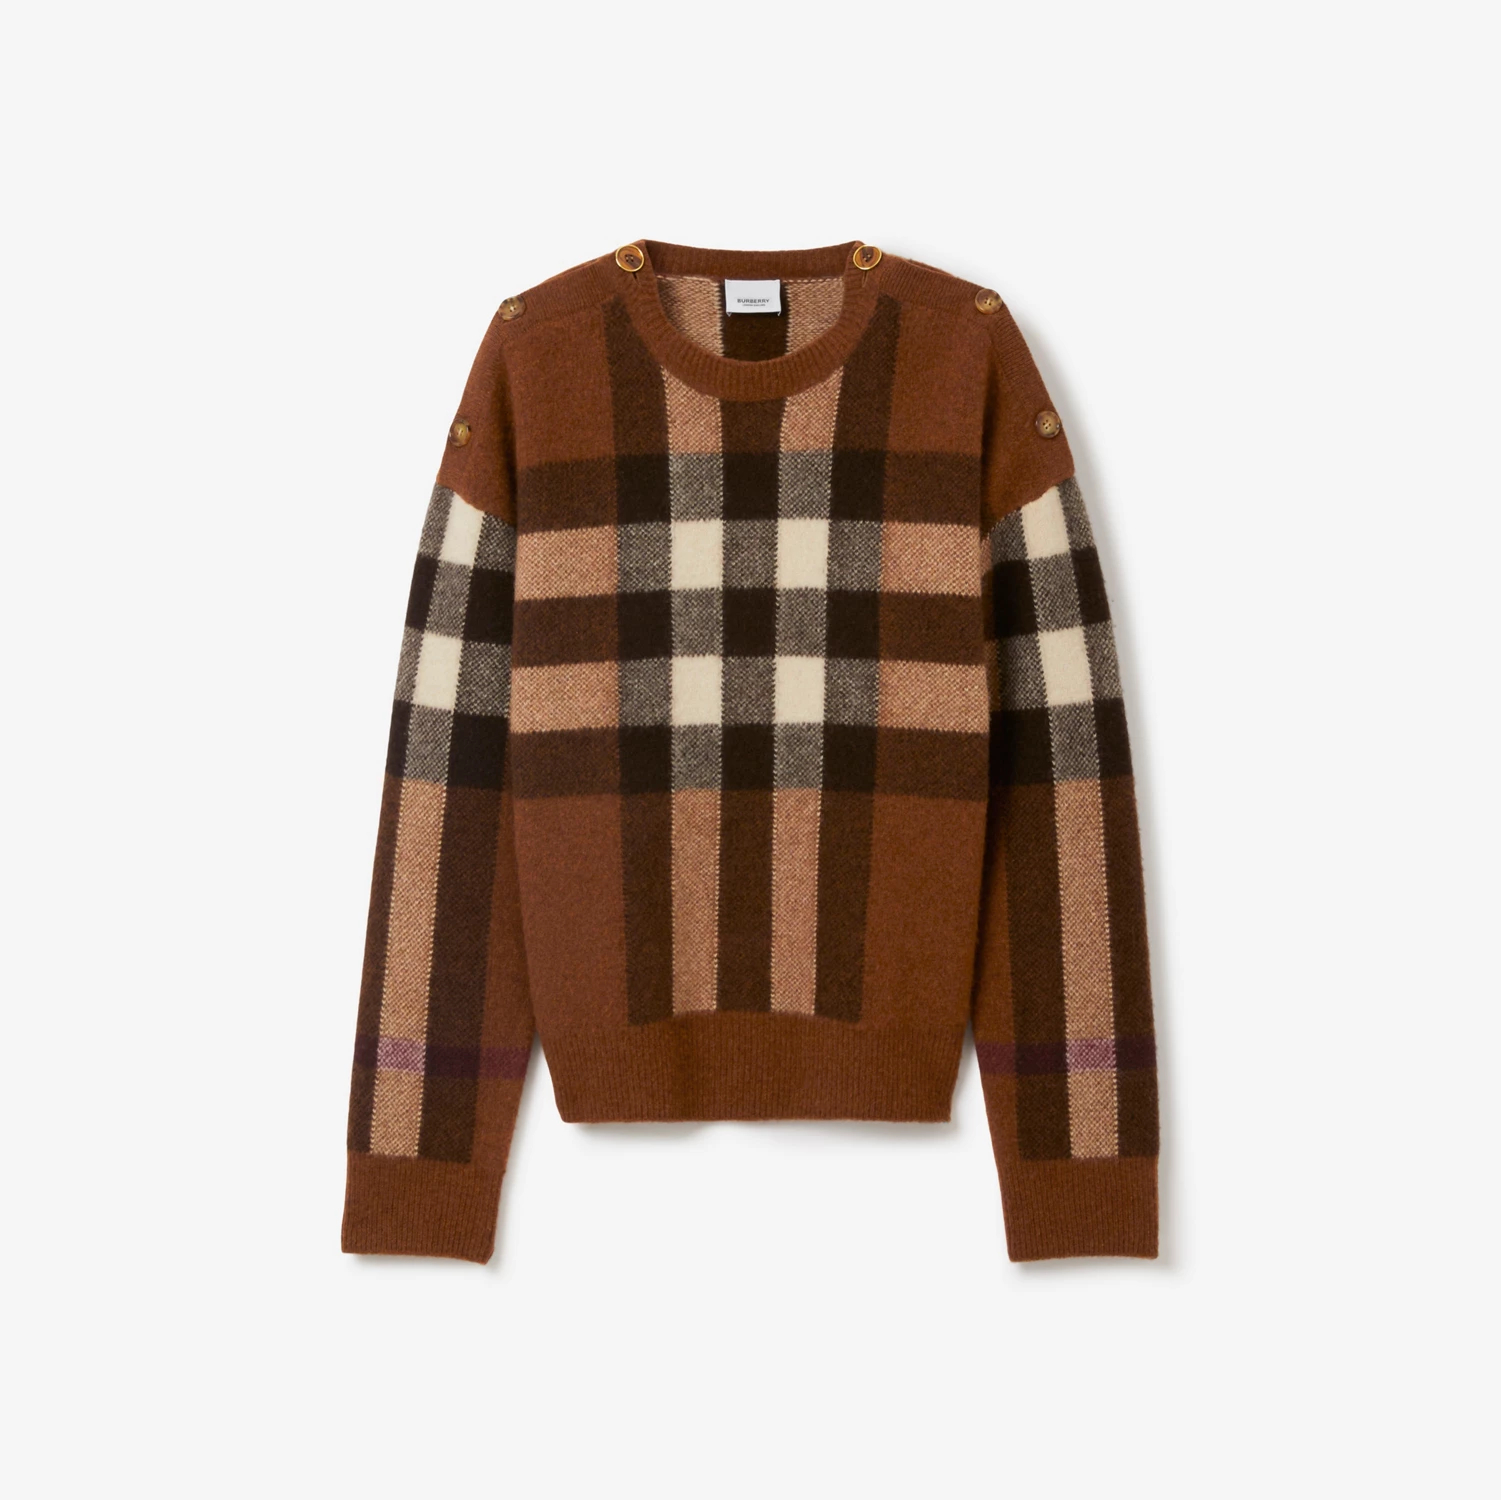 Burberry sweaters is a British luxury fashion brand renowned for its iconic trench coats, distinctive check pattern